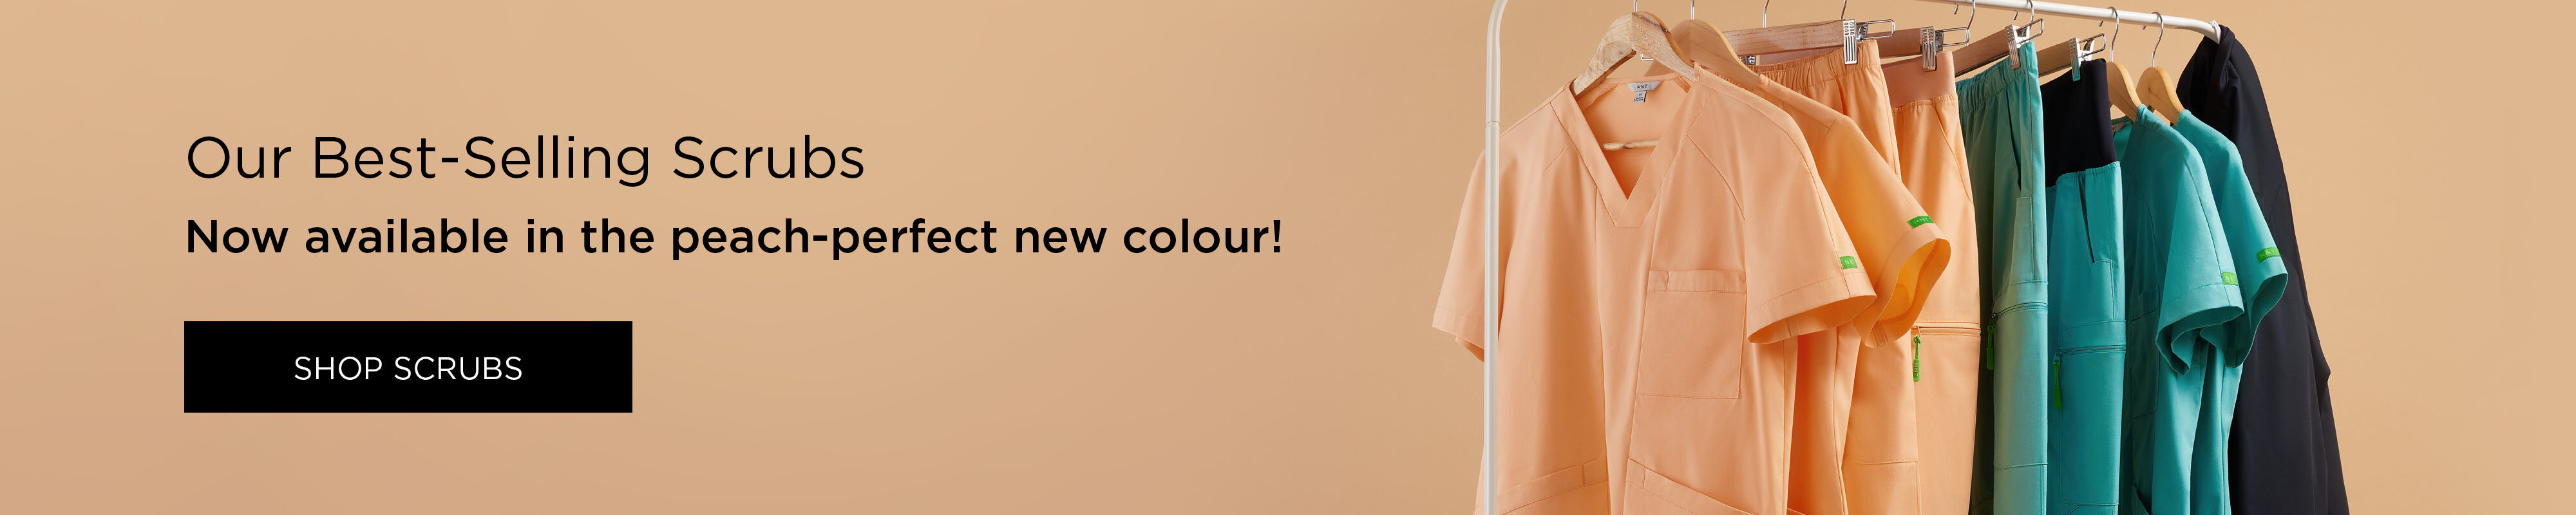 Our best-selling scrubs now available in the peach-perfect new colour